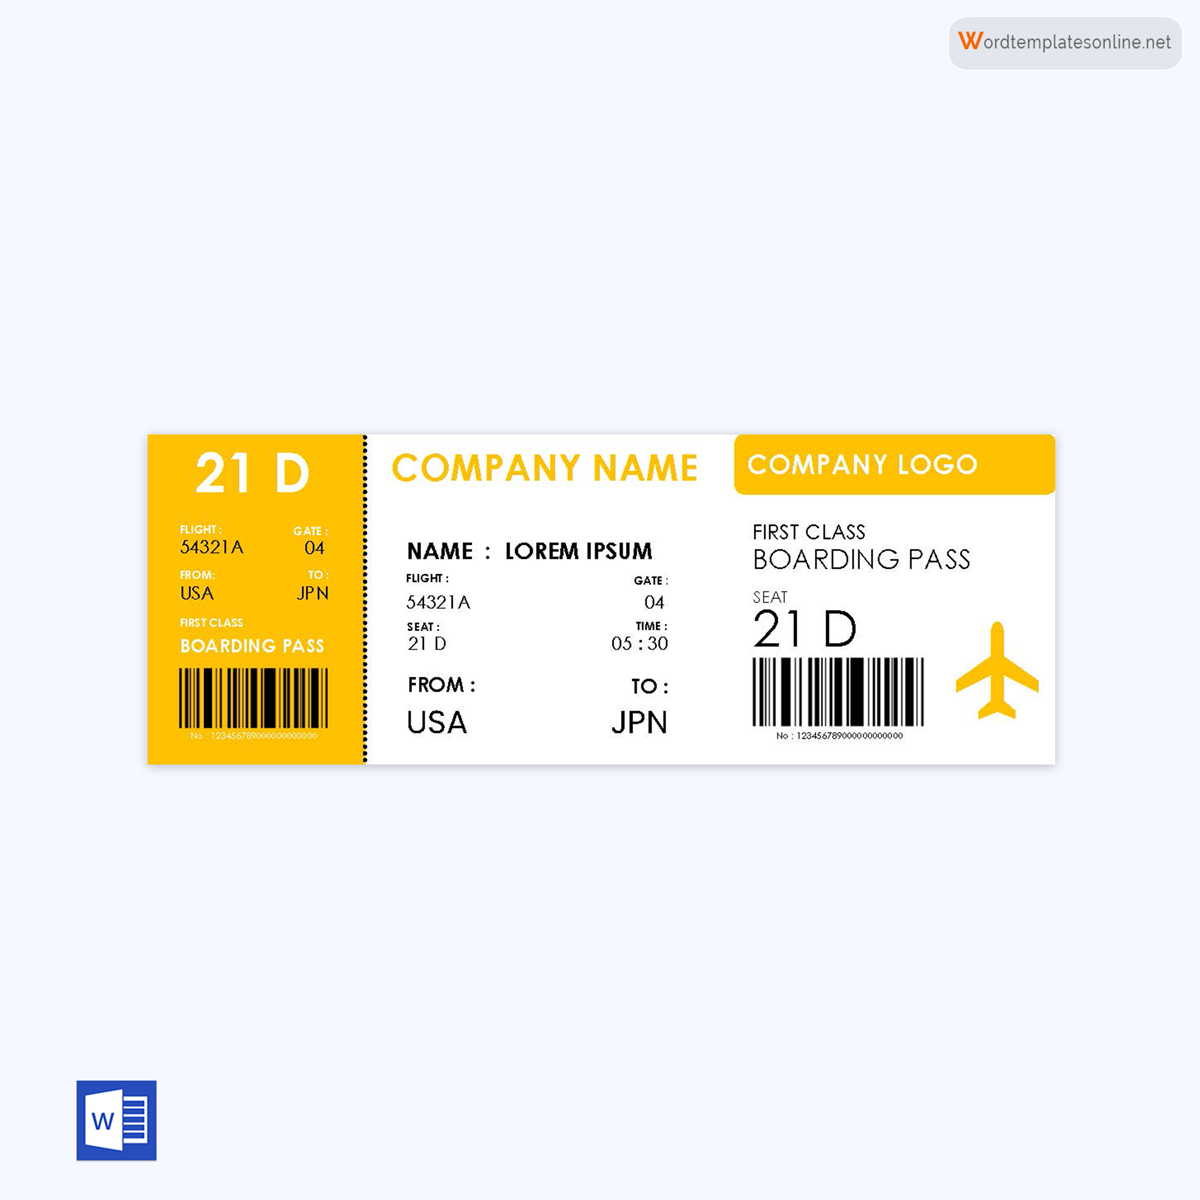 Boarding Pass Template - Word Example